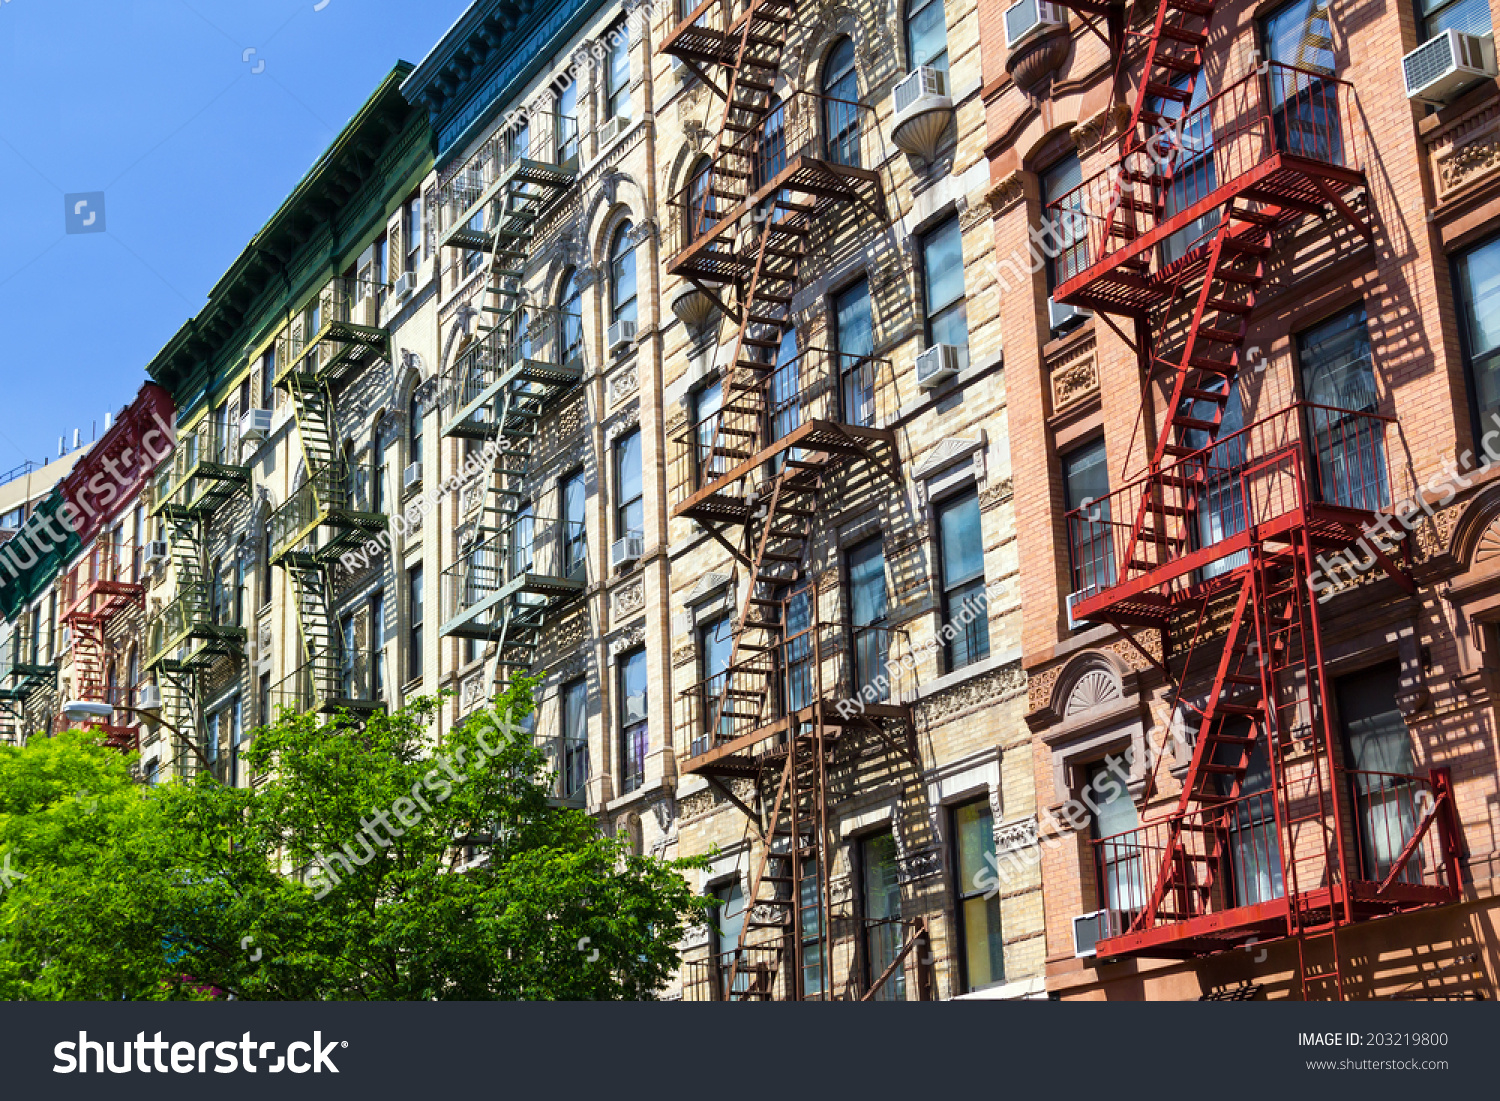 New York City Row Colorful Buildings Stock Photo 203219800 - Shutterstock